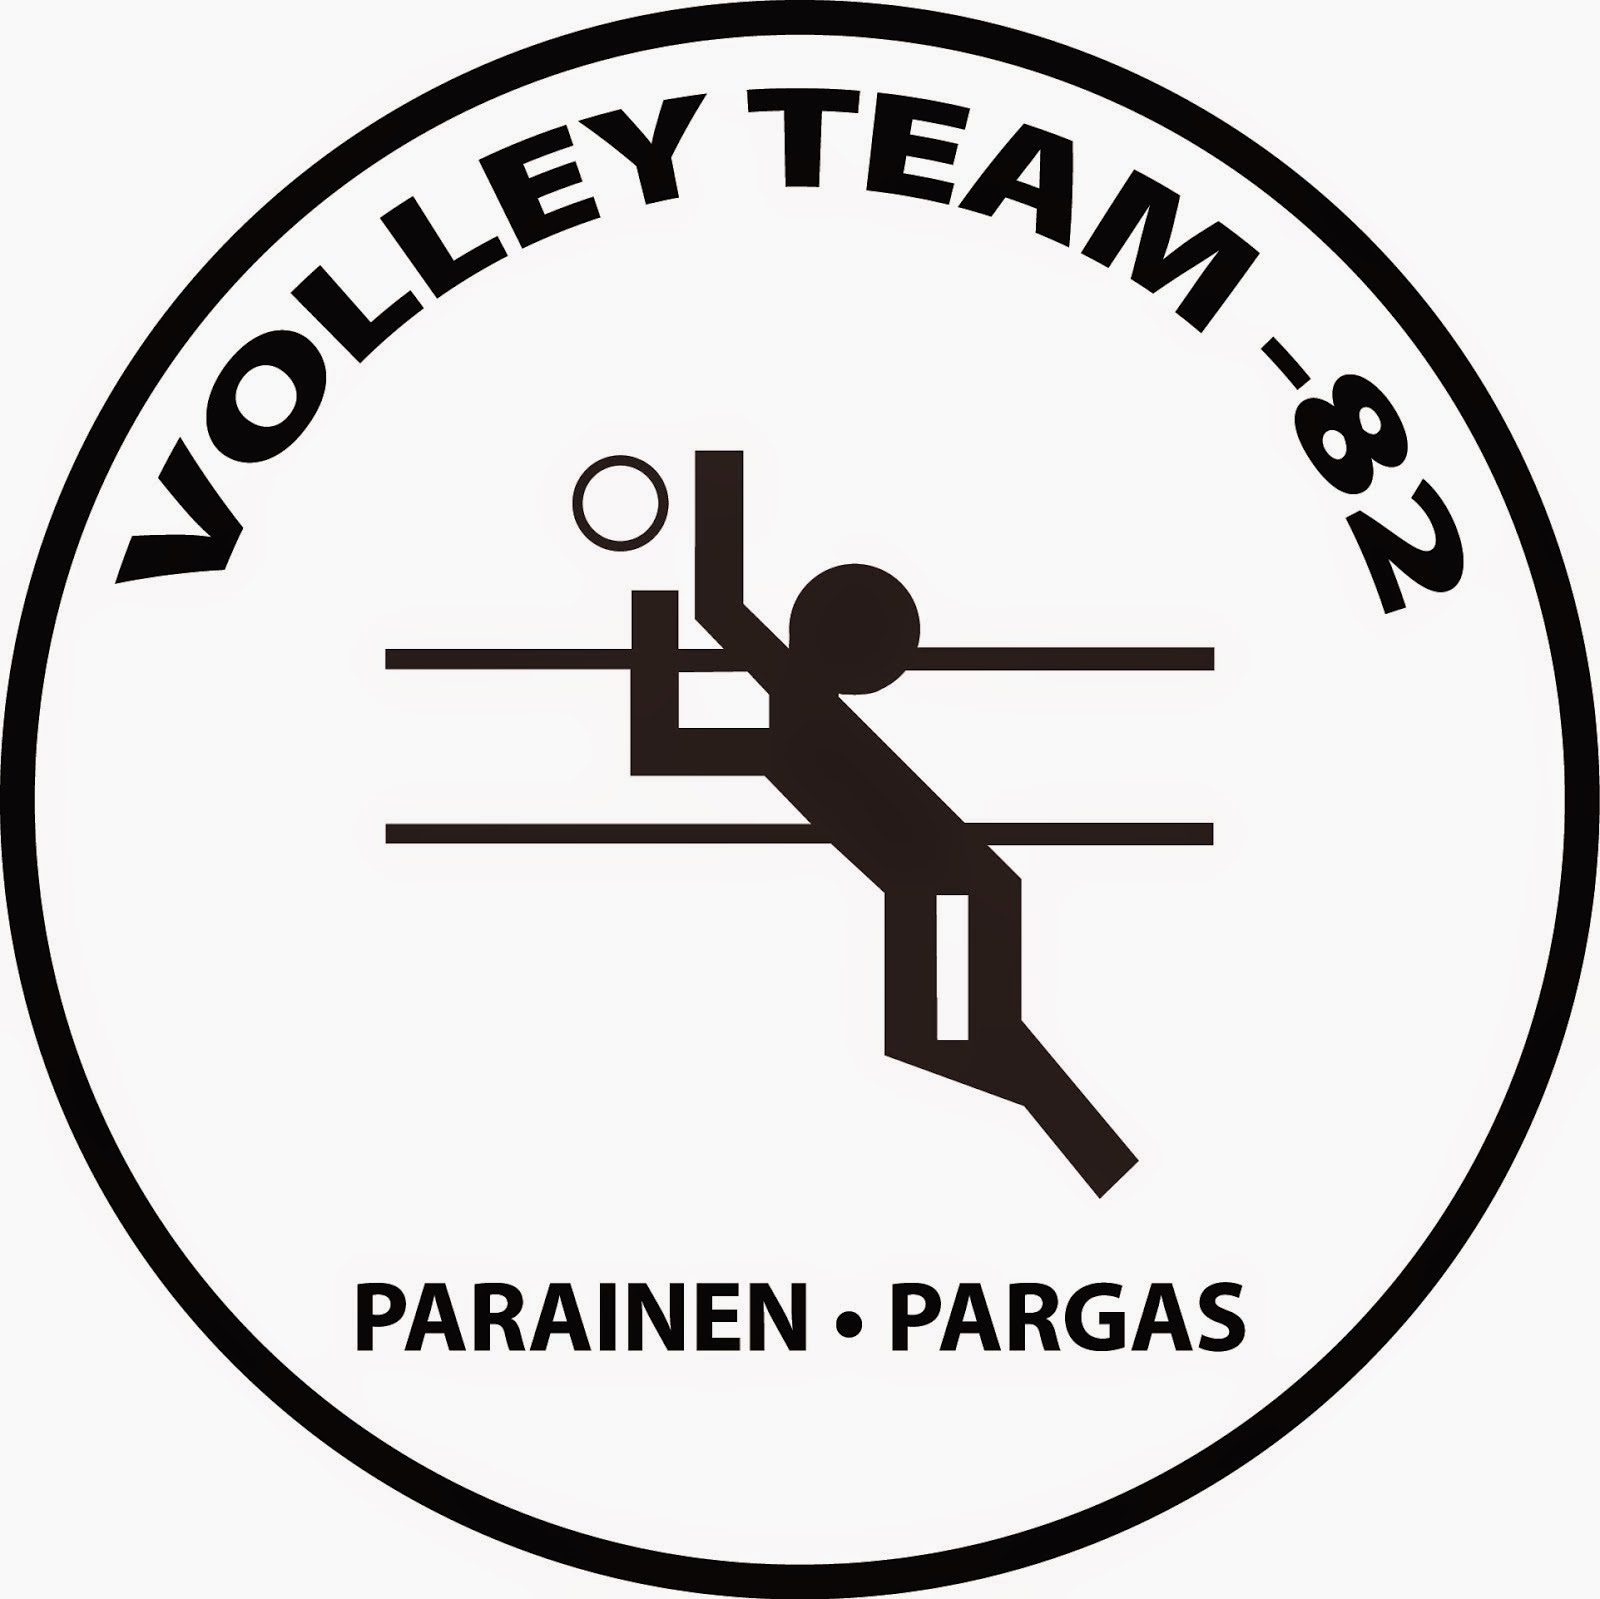 Volley Team -82